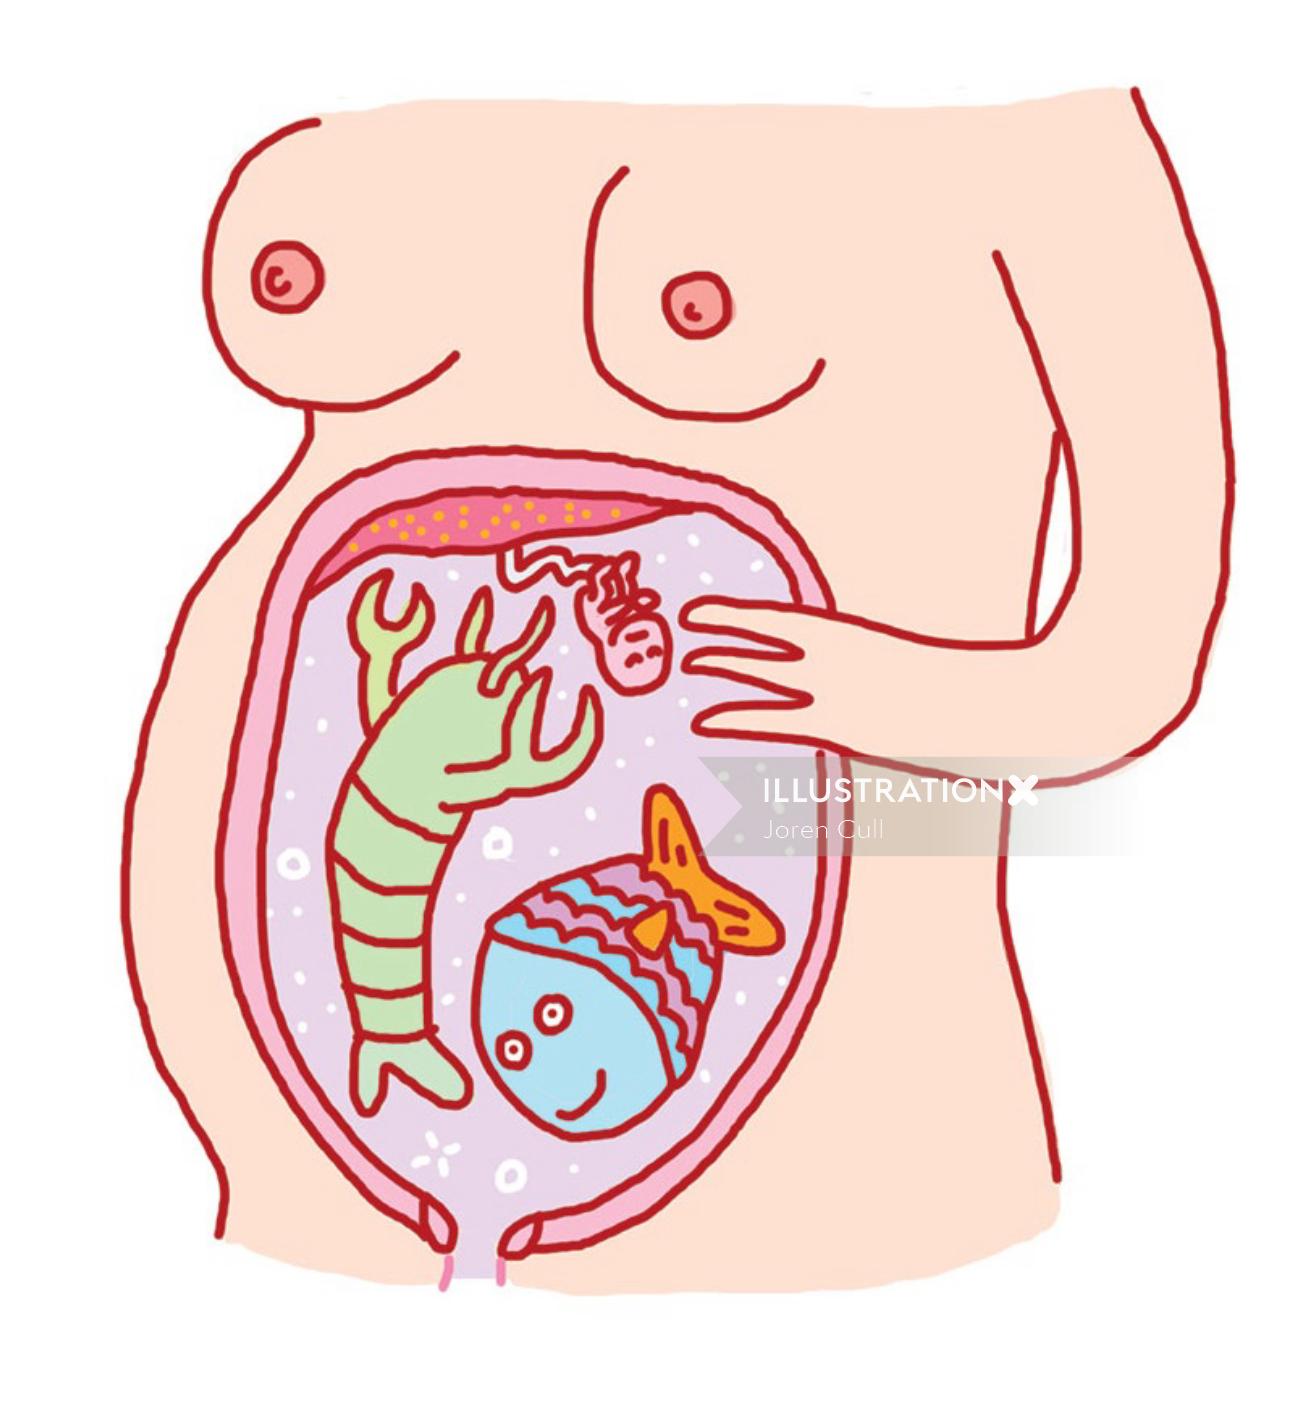 Comic illustration fishes inside stomach 